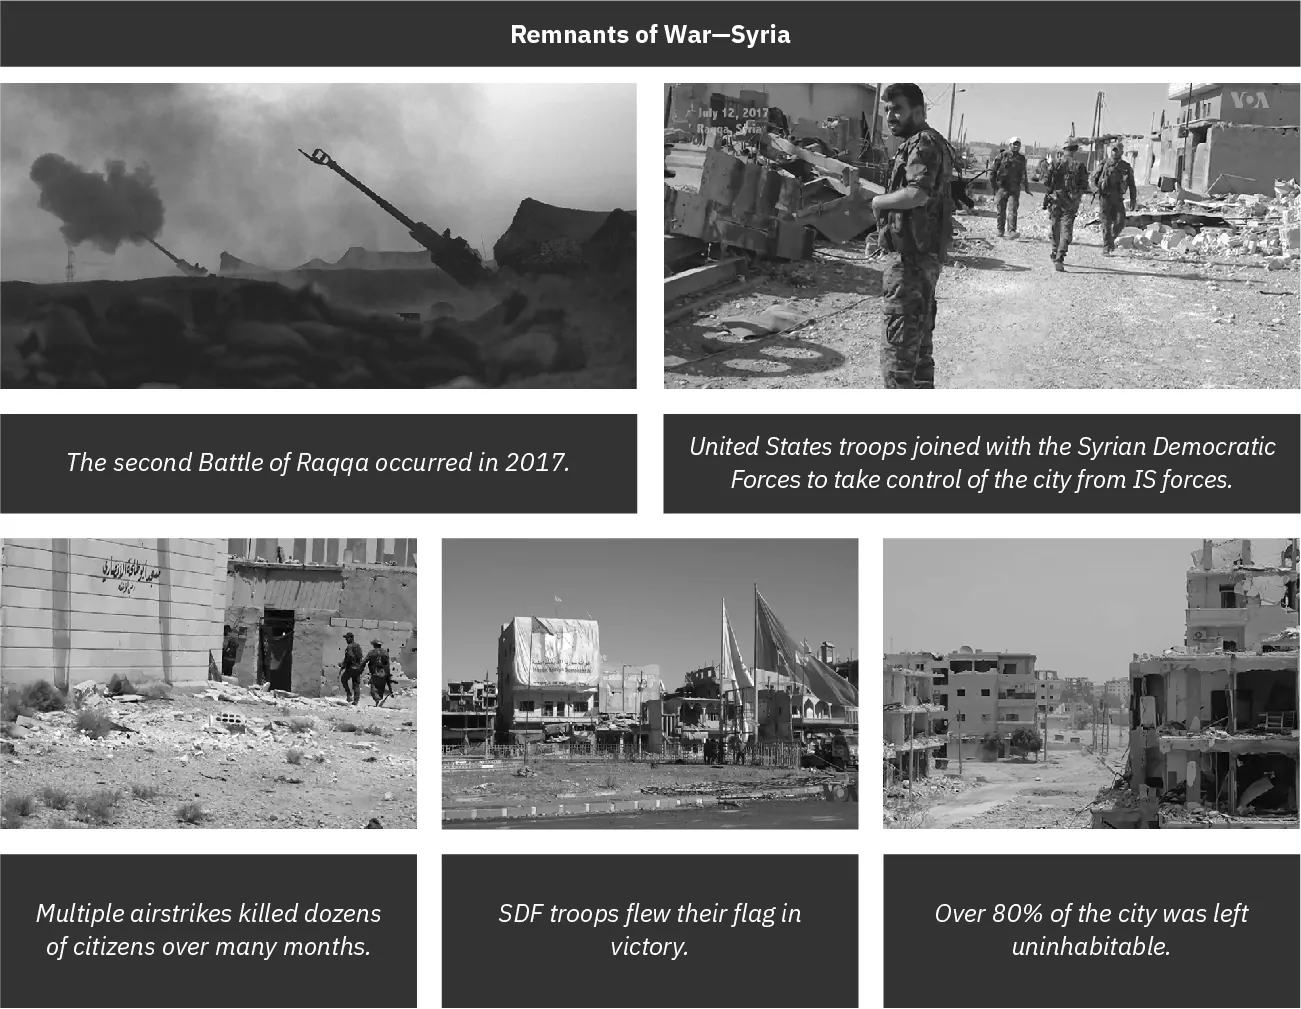 The final revision of the photo essay includes five different black and white images of destruction caused by the Syrian War. The first image shows artillery guns during the Battle of Raqqa, 2017. The second image shows soldiers holding guns. The third image shows a destroyed building surrounded by soldiers. The fourth image displays buildings damaged in airstrikes, and the fifth image shows a damaged building with the troops flying their flags in victory.